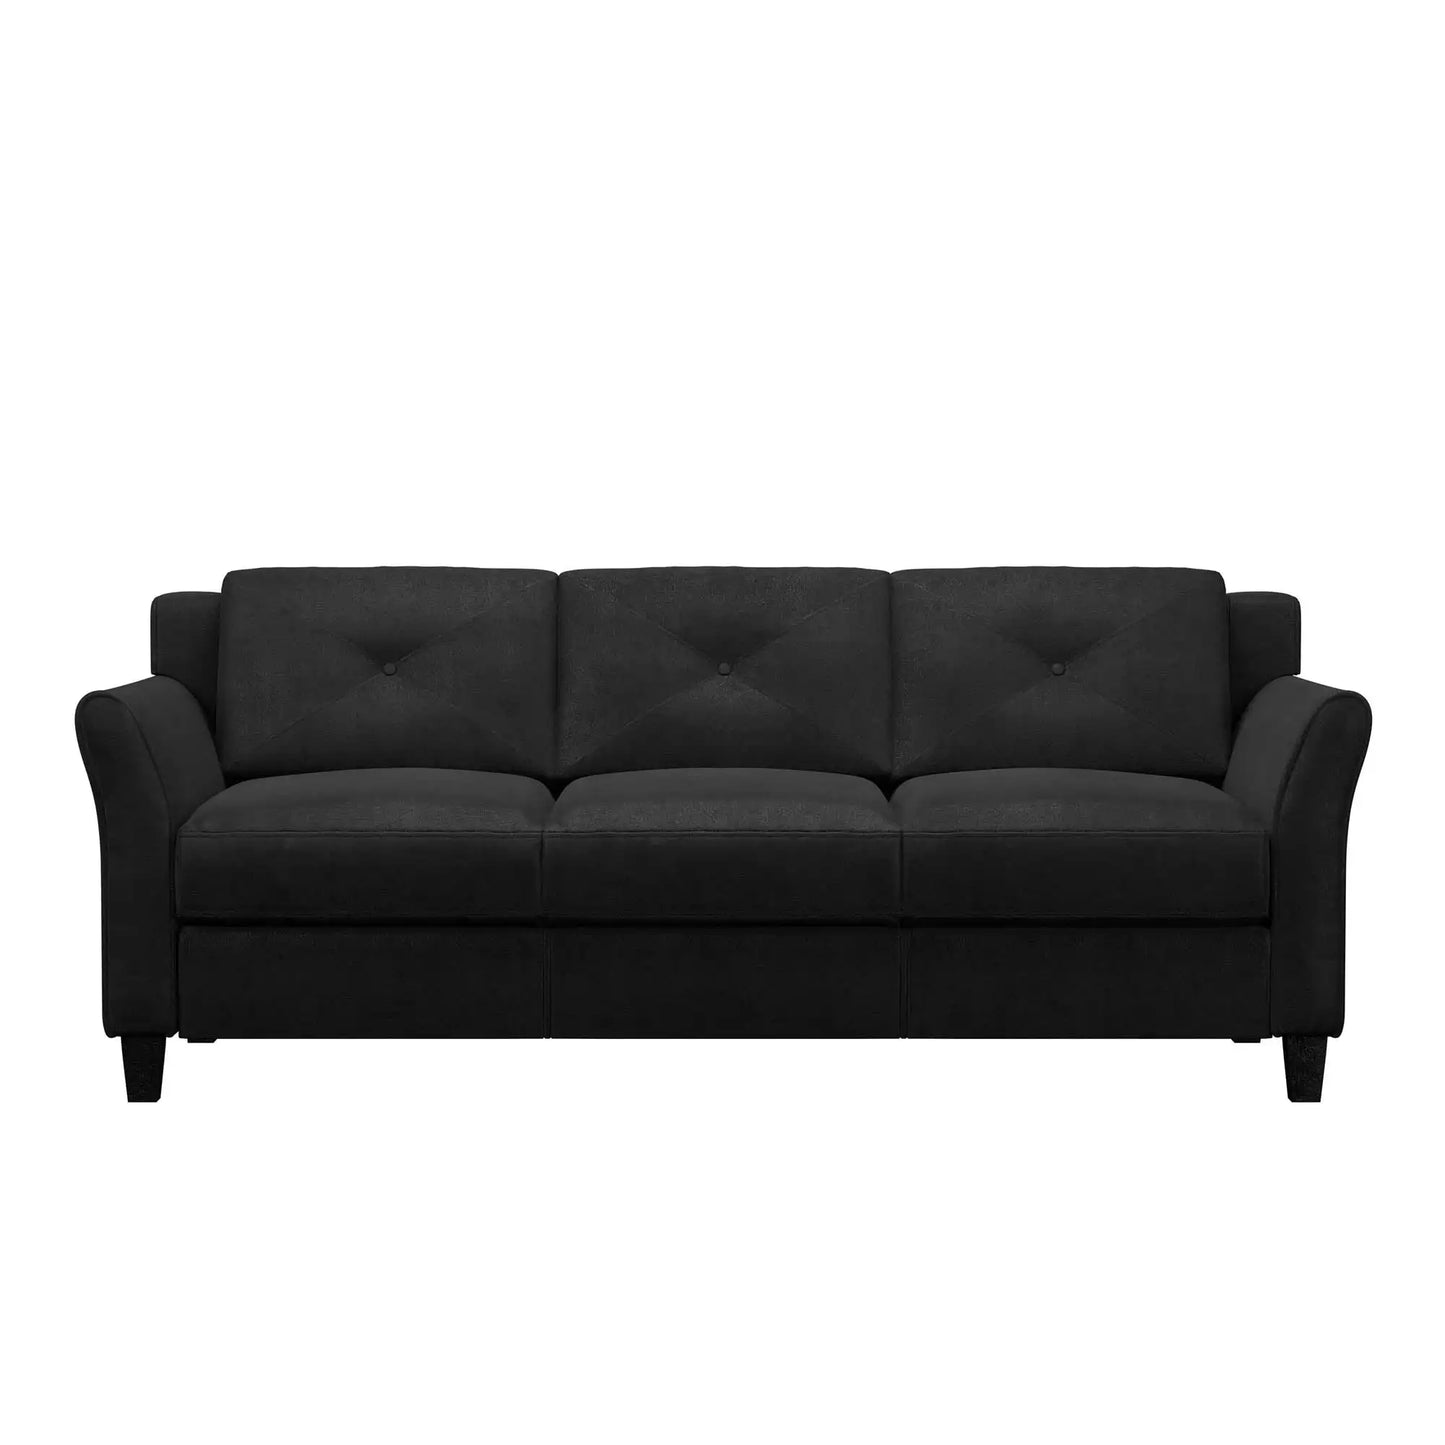 Black Taryn Sofa with Curved Arms